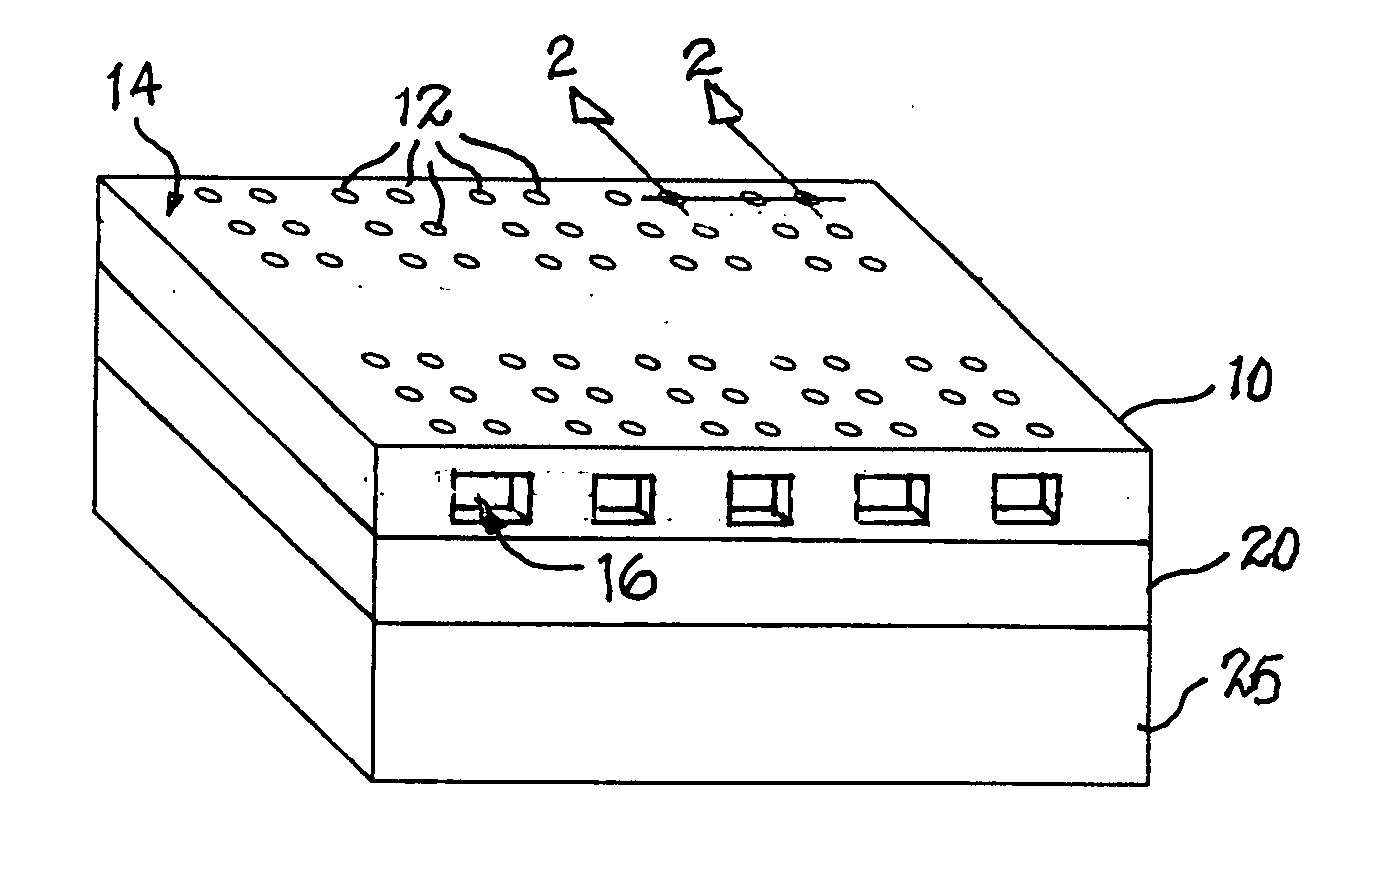 Braille module with compressible pin arrays